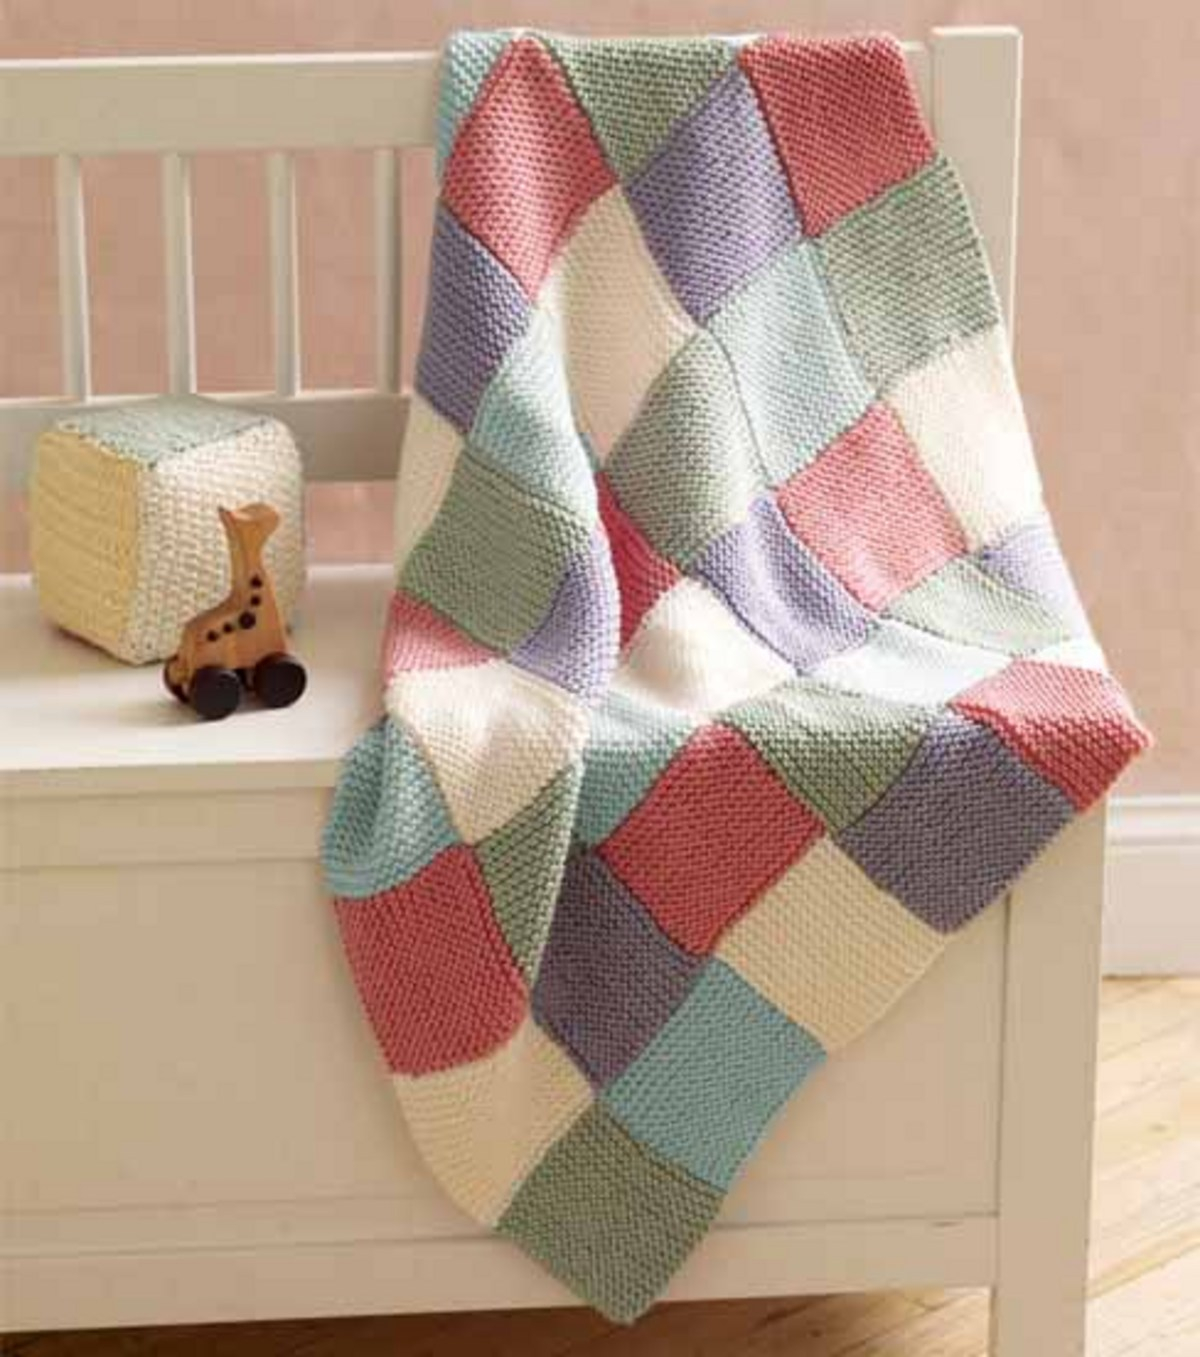 Patchwork Knitting Patterns For Blankets Learn How To Make A Patchwork Ba Throw With Martha Stewart Knit